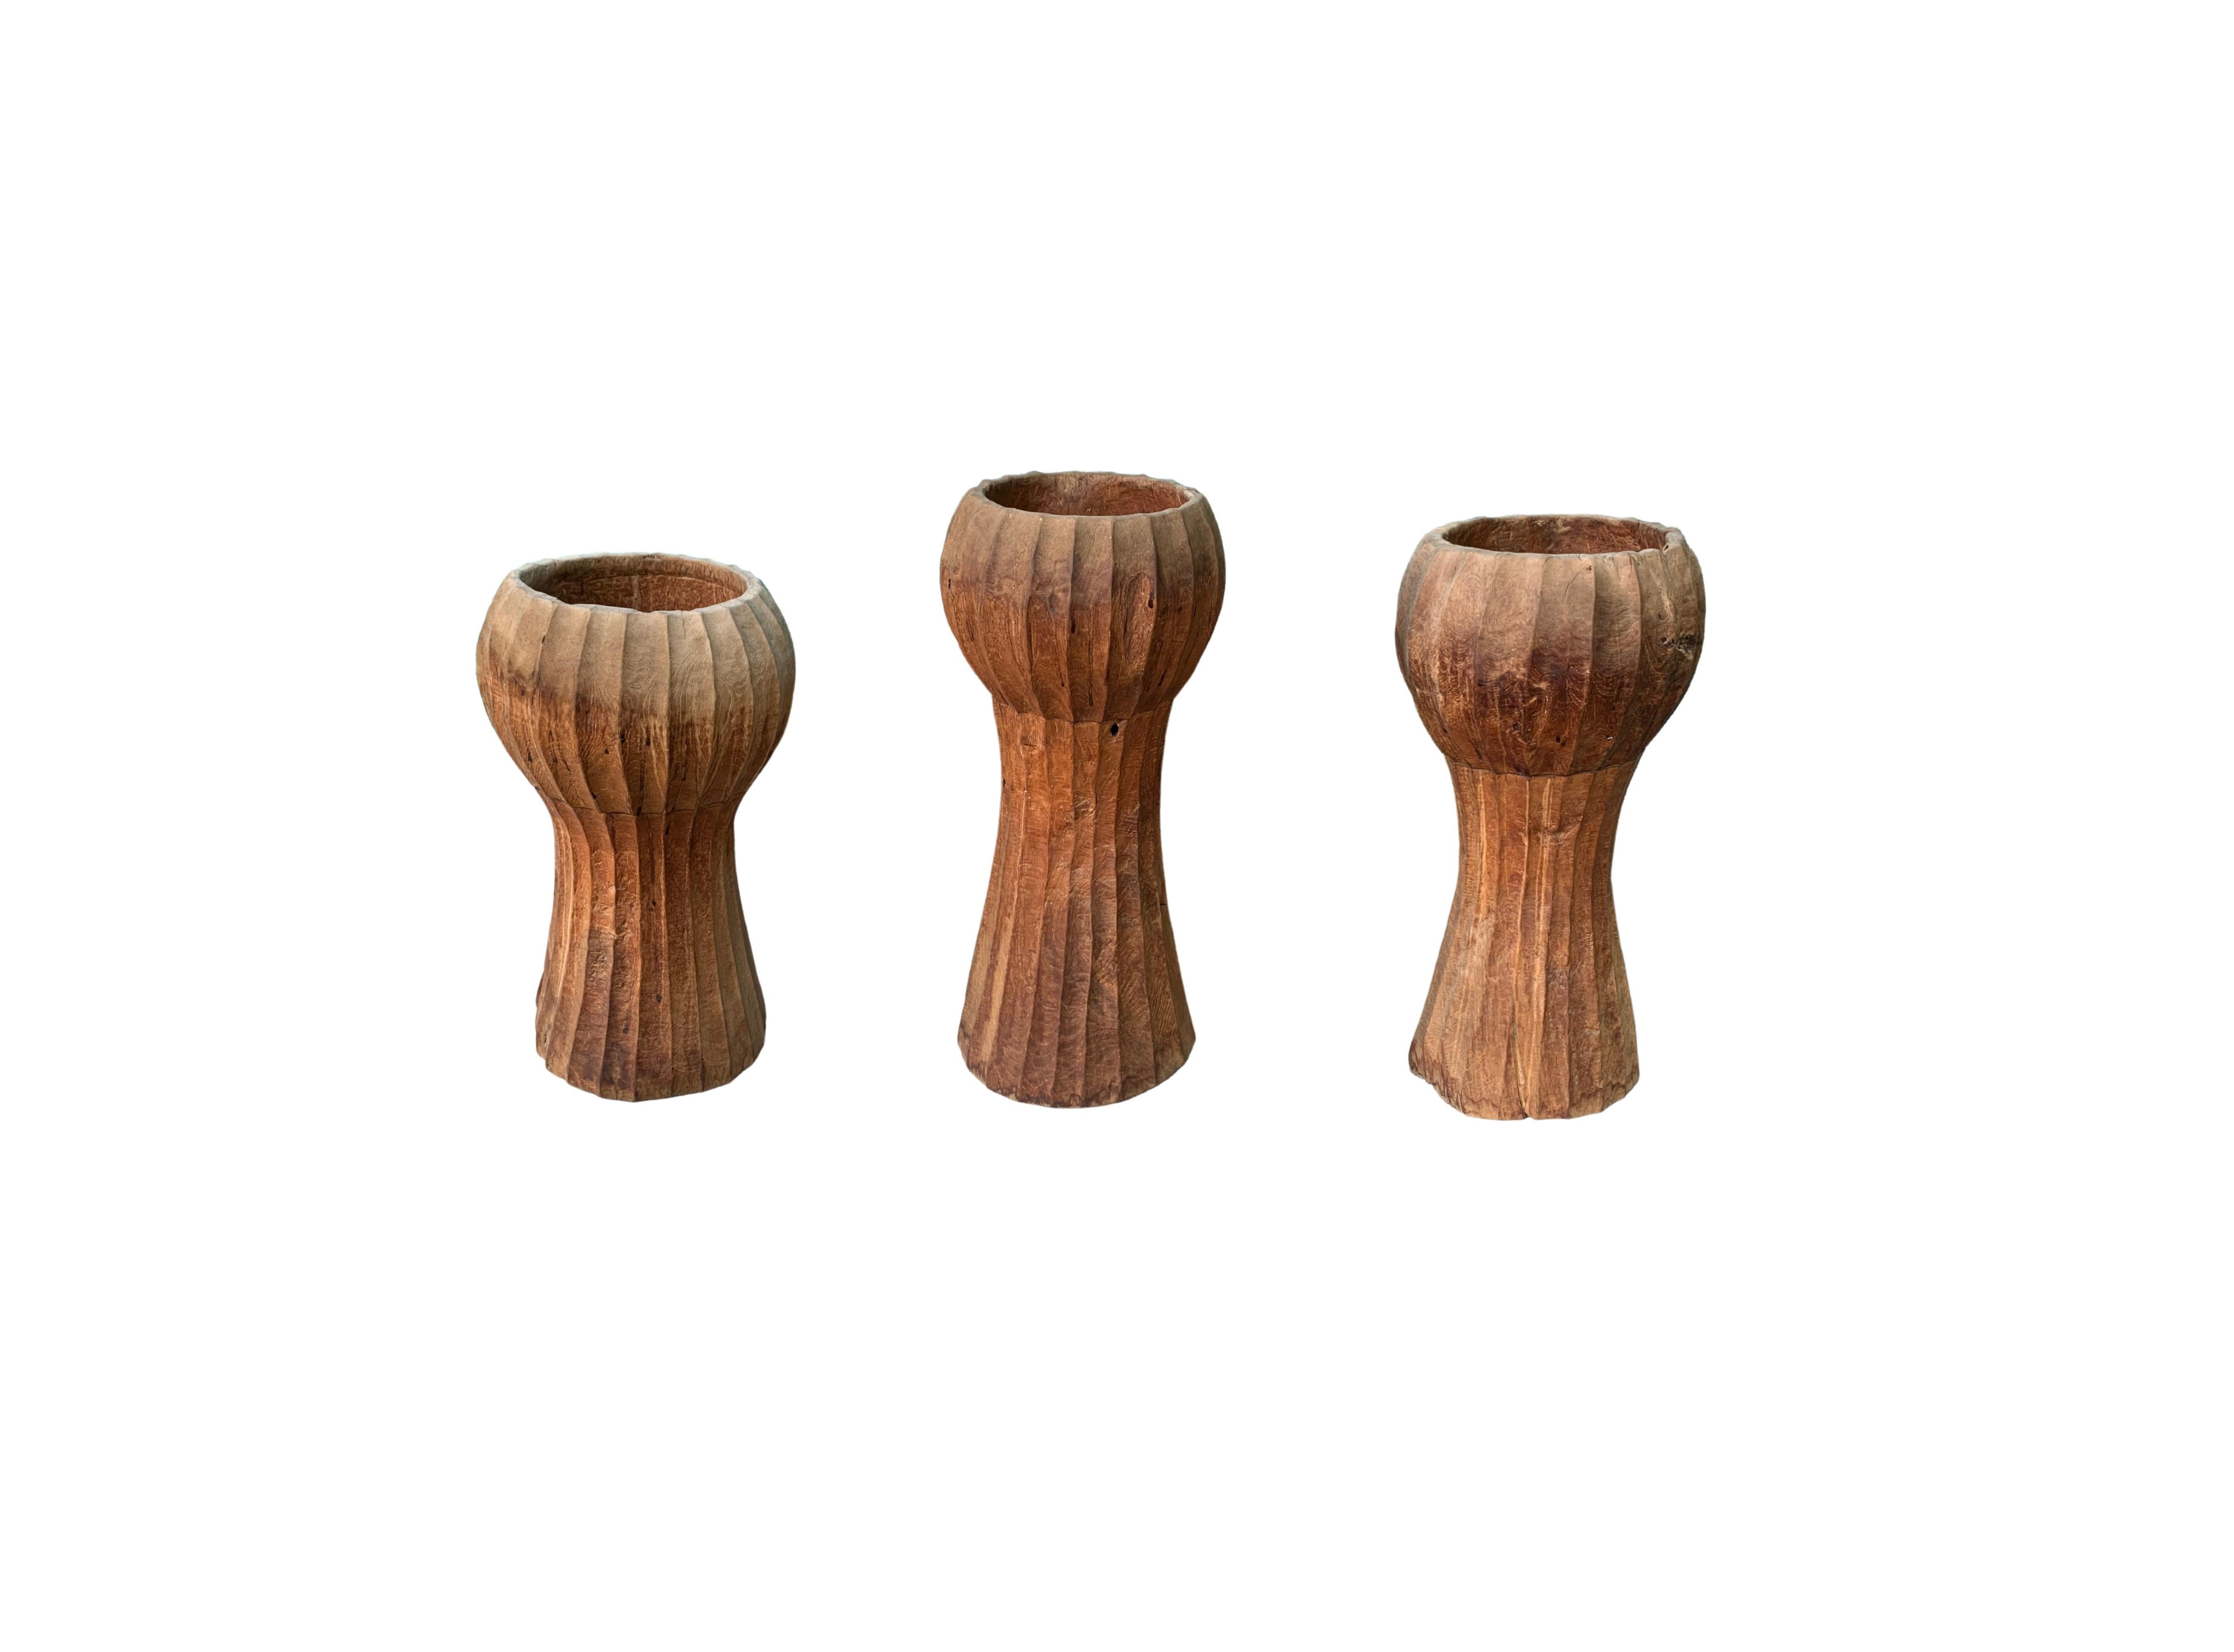 Organic Modern Sculptural Wooden Planters / Decorative Bowls Hand-Crafted in Indonesia For Sale